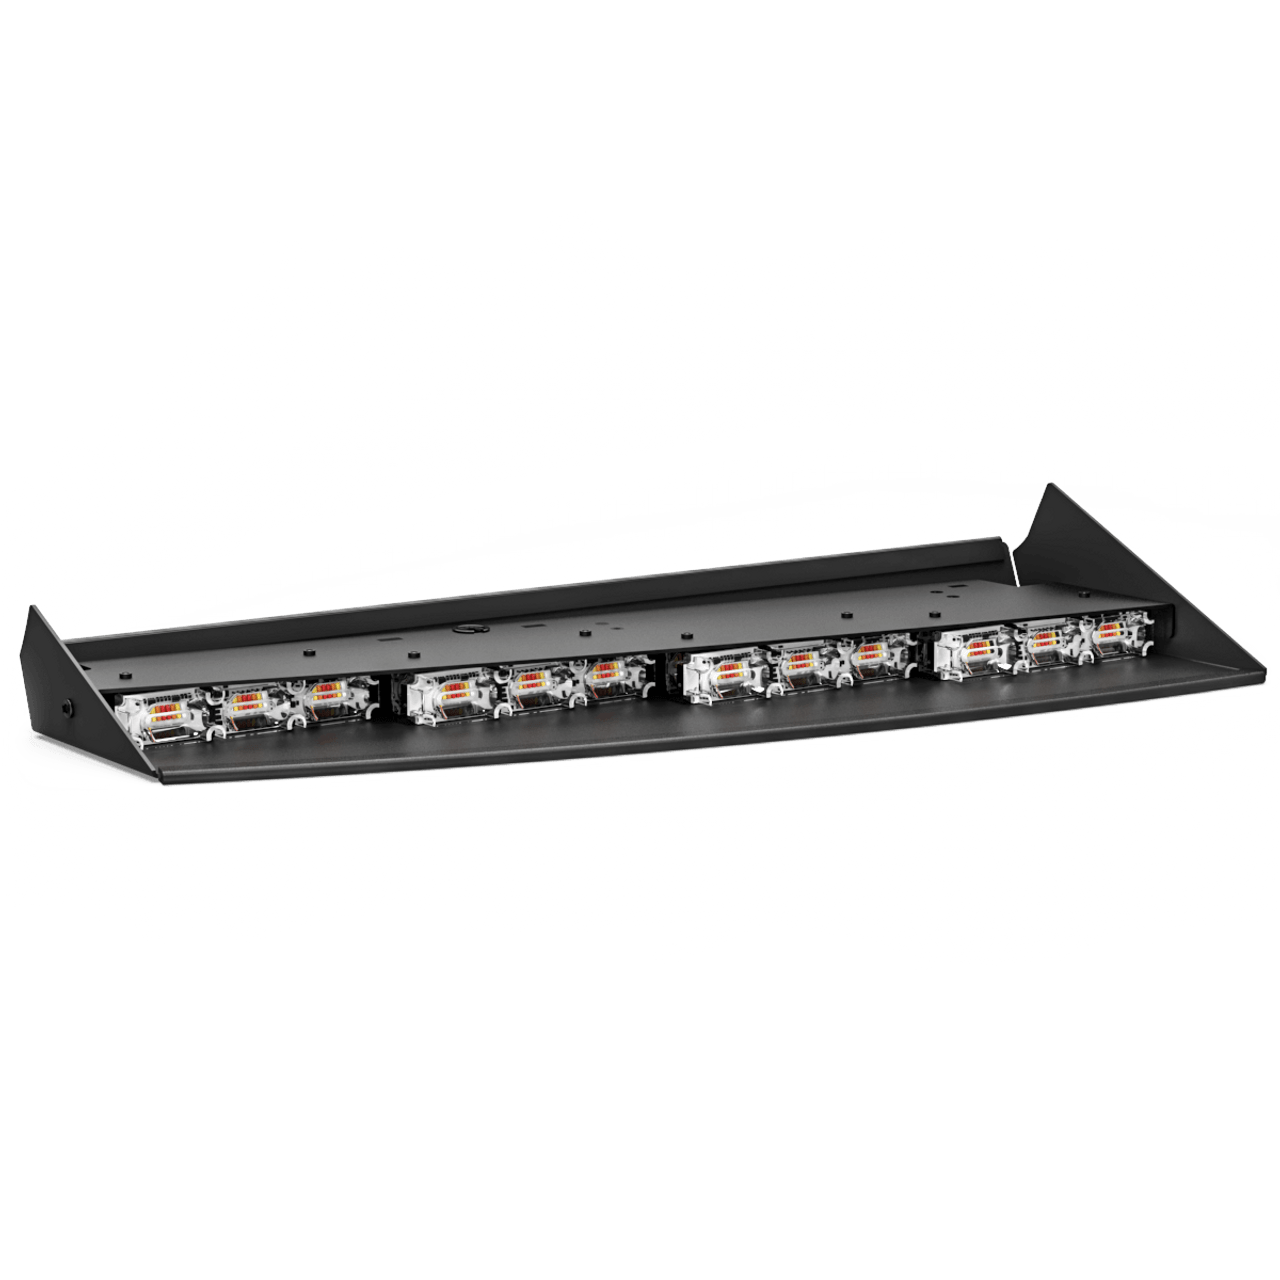 Feniex Q-1619-EXP-18-21 Quad, Ford Expedition, 2018-2021 Interior Light Bar, Front Facing, Four LED Colors Each Side (Red, Blue, White and Amber)